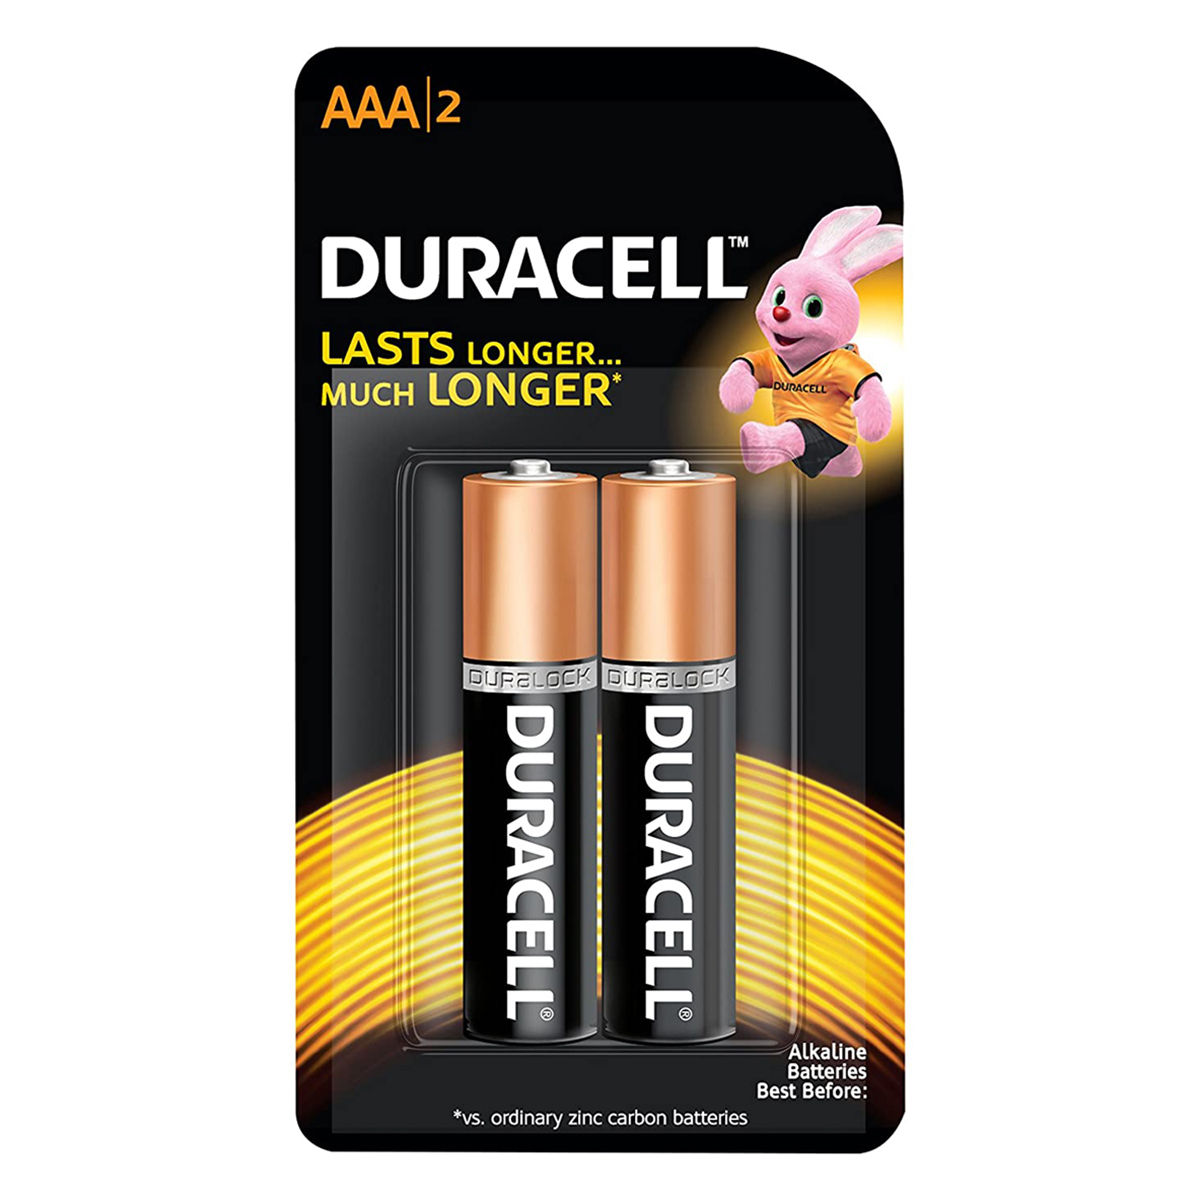 Buy Duracell AAA Batteries, 2 Count Online